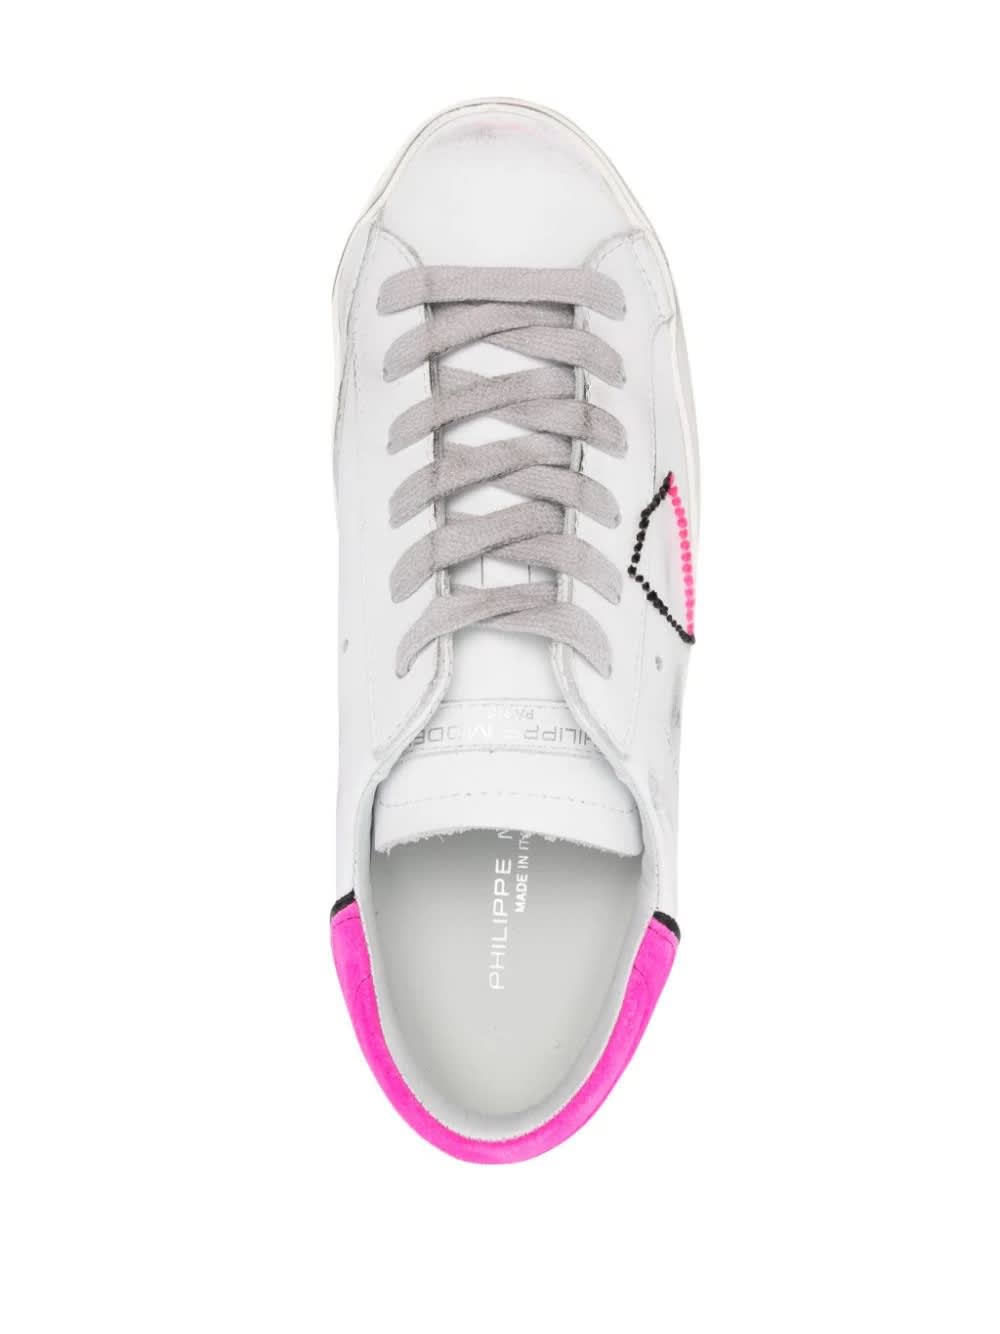 Shop Philippe Model Prsx Low Sneakers - White And Fuchsia